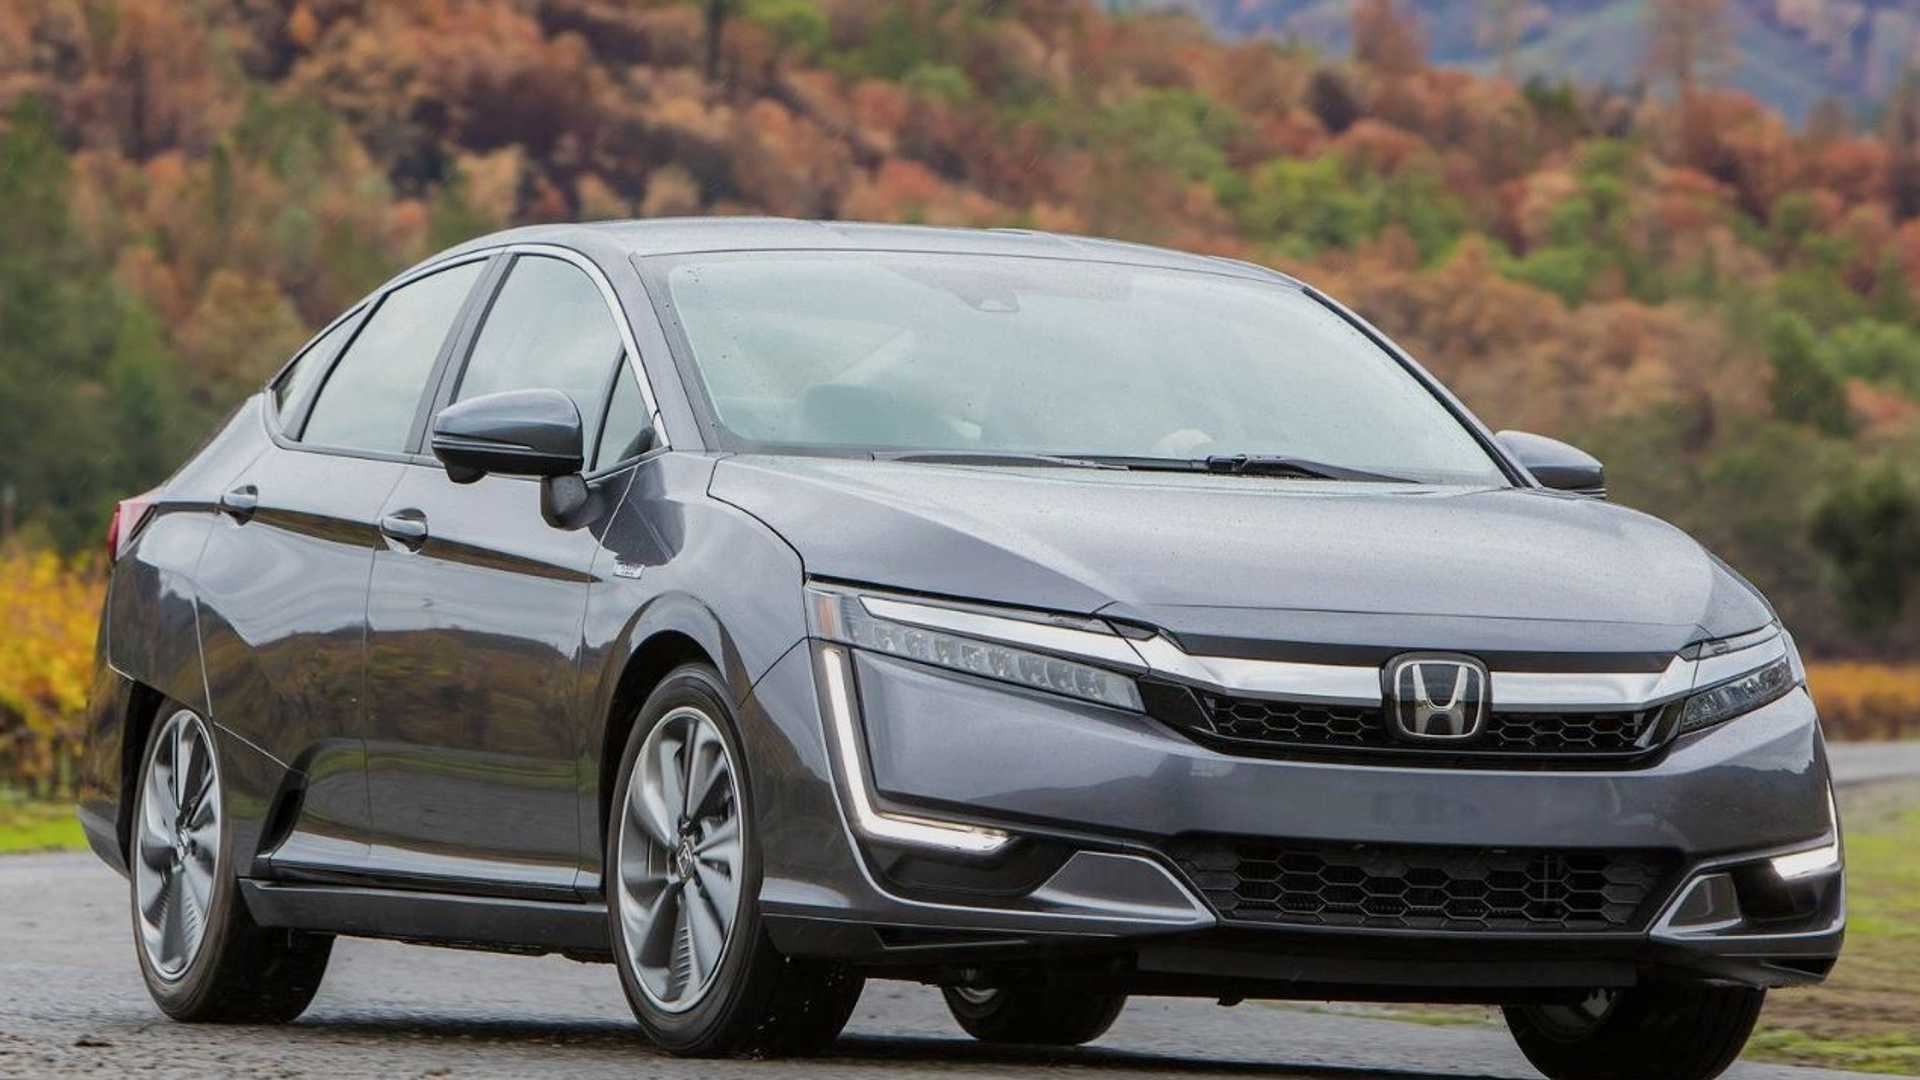 2020 Honda Clarity PHEV Stocked At CA Dealers, Can Order Nationwide